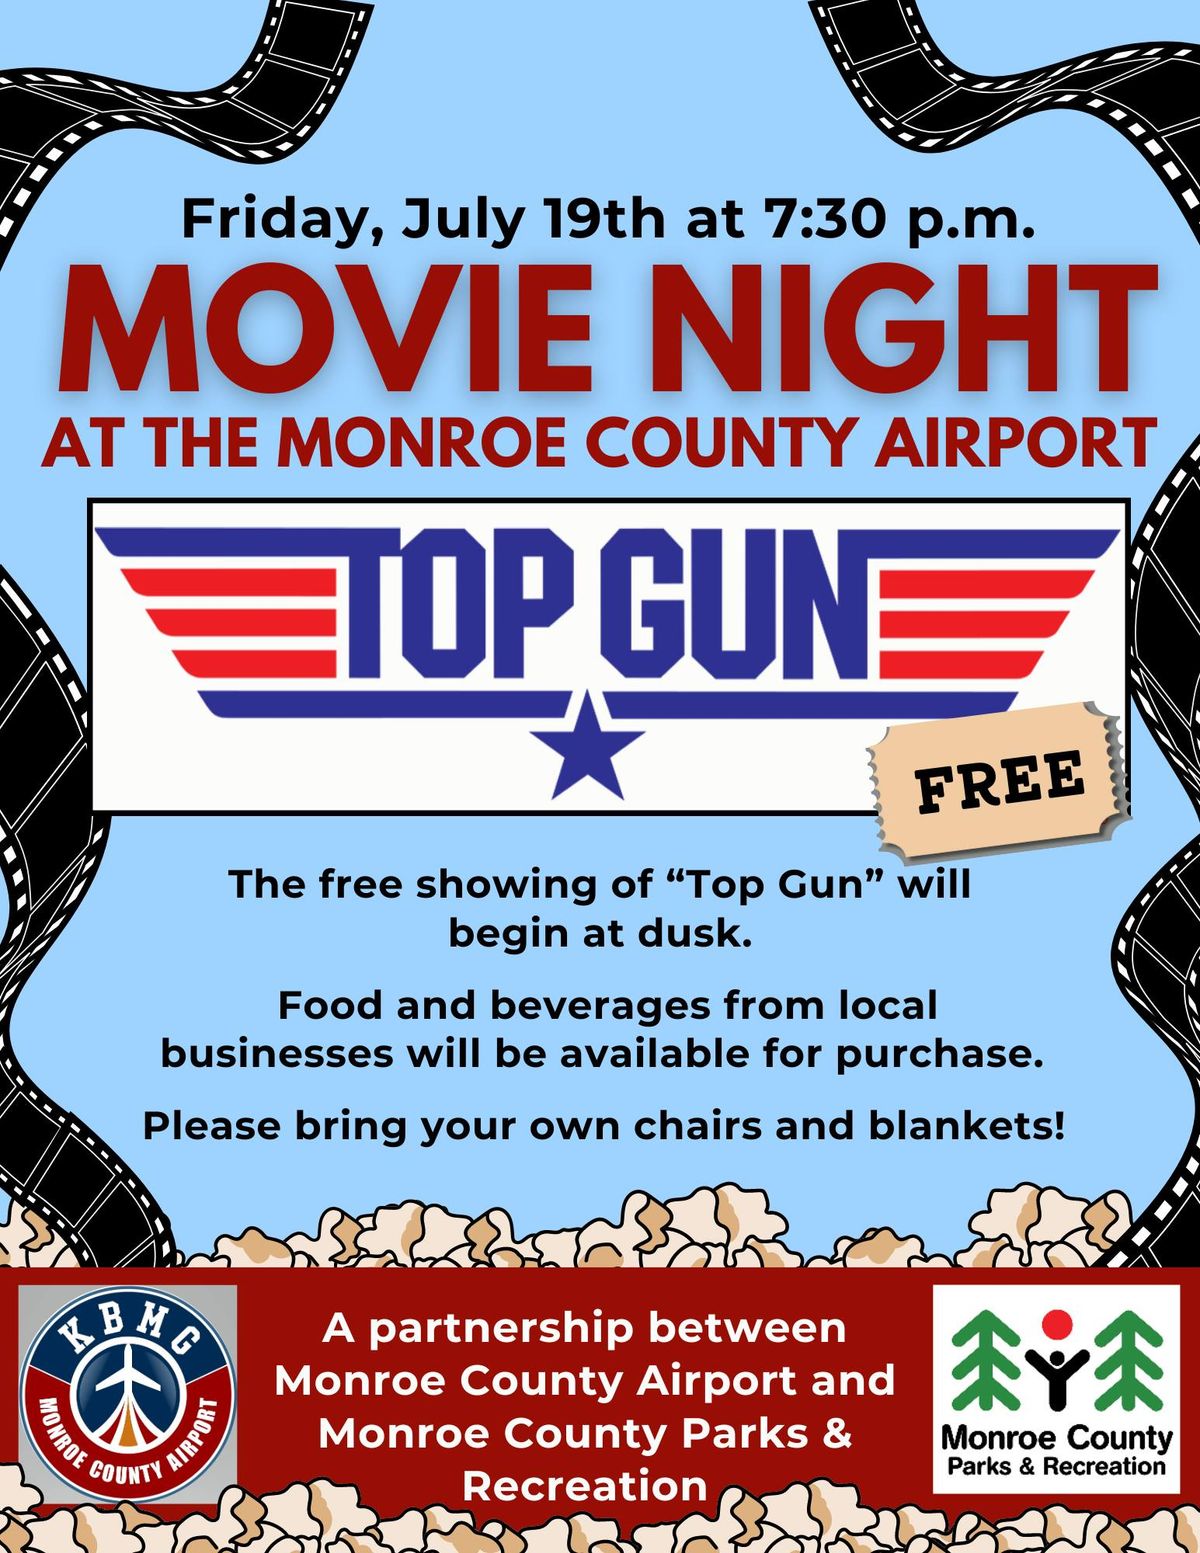 Movie Night at the Monroe County Airport